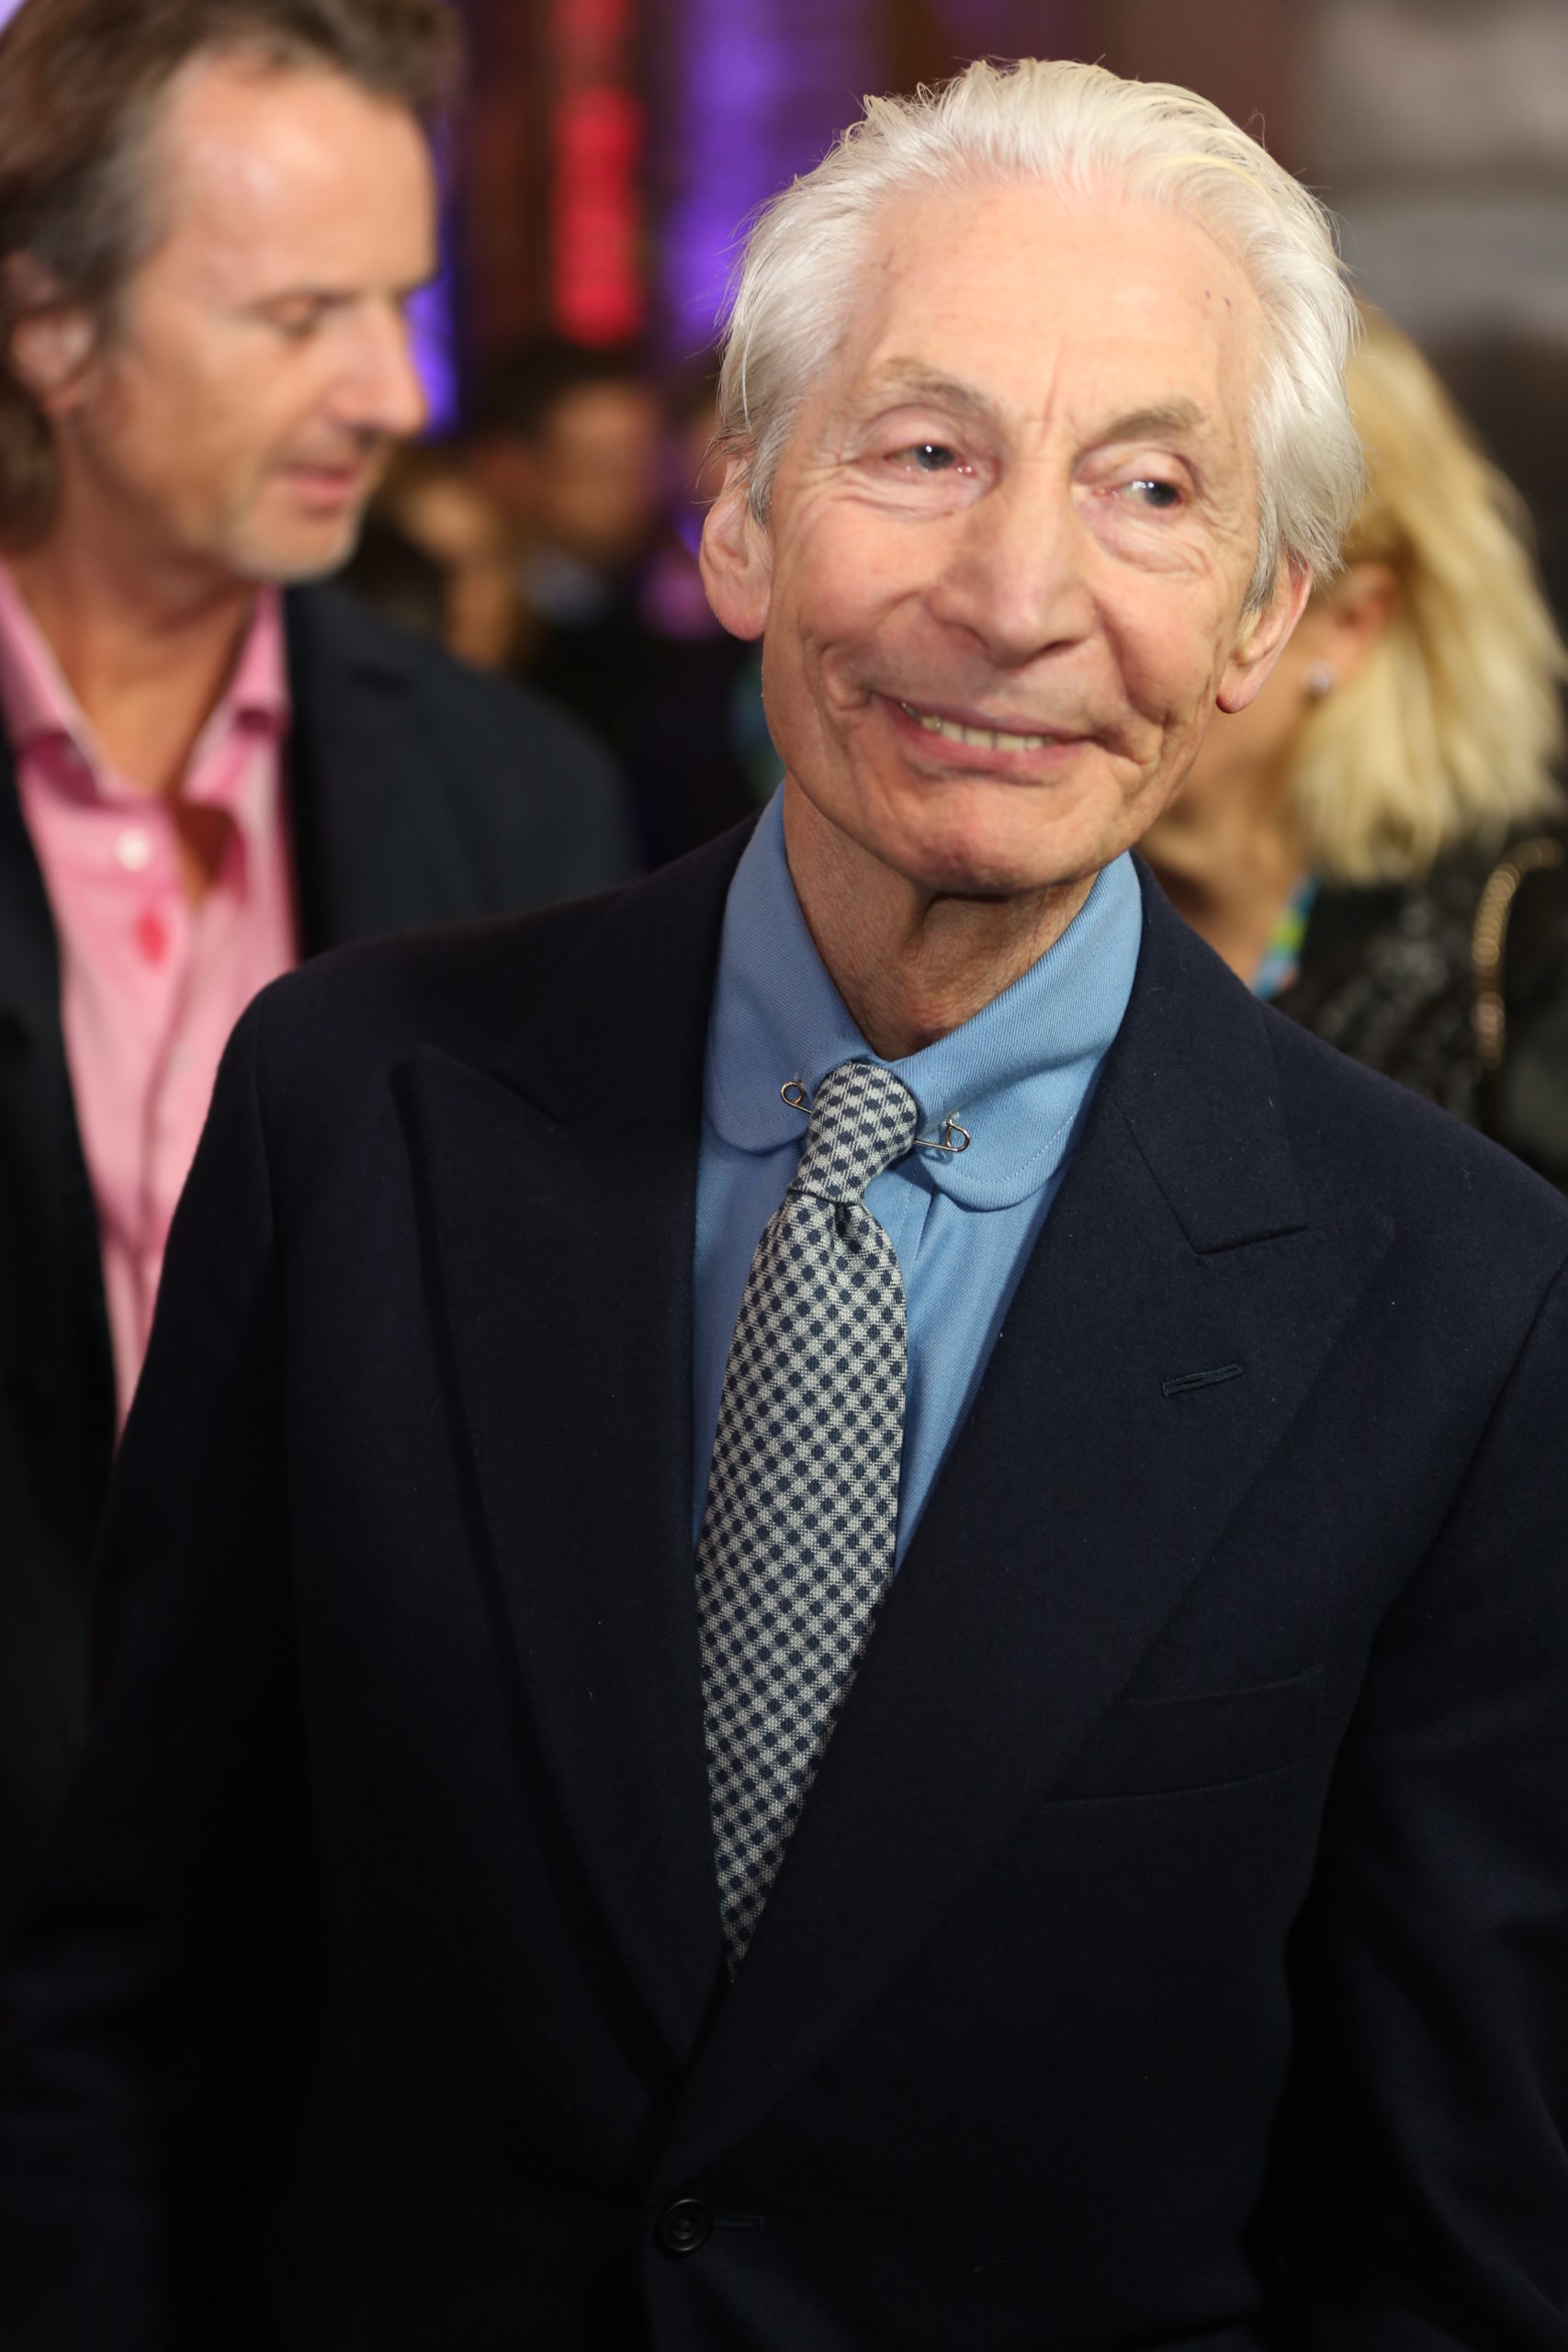 The Rolling Stones Drummer Charlie Watts Died